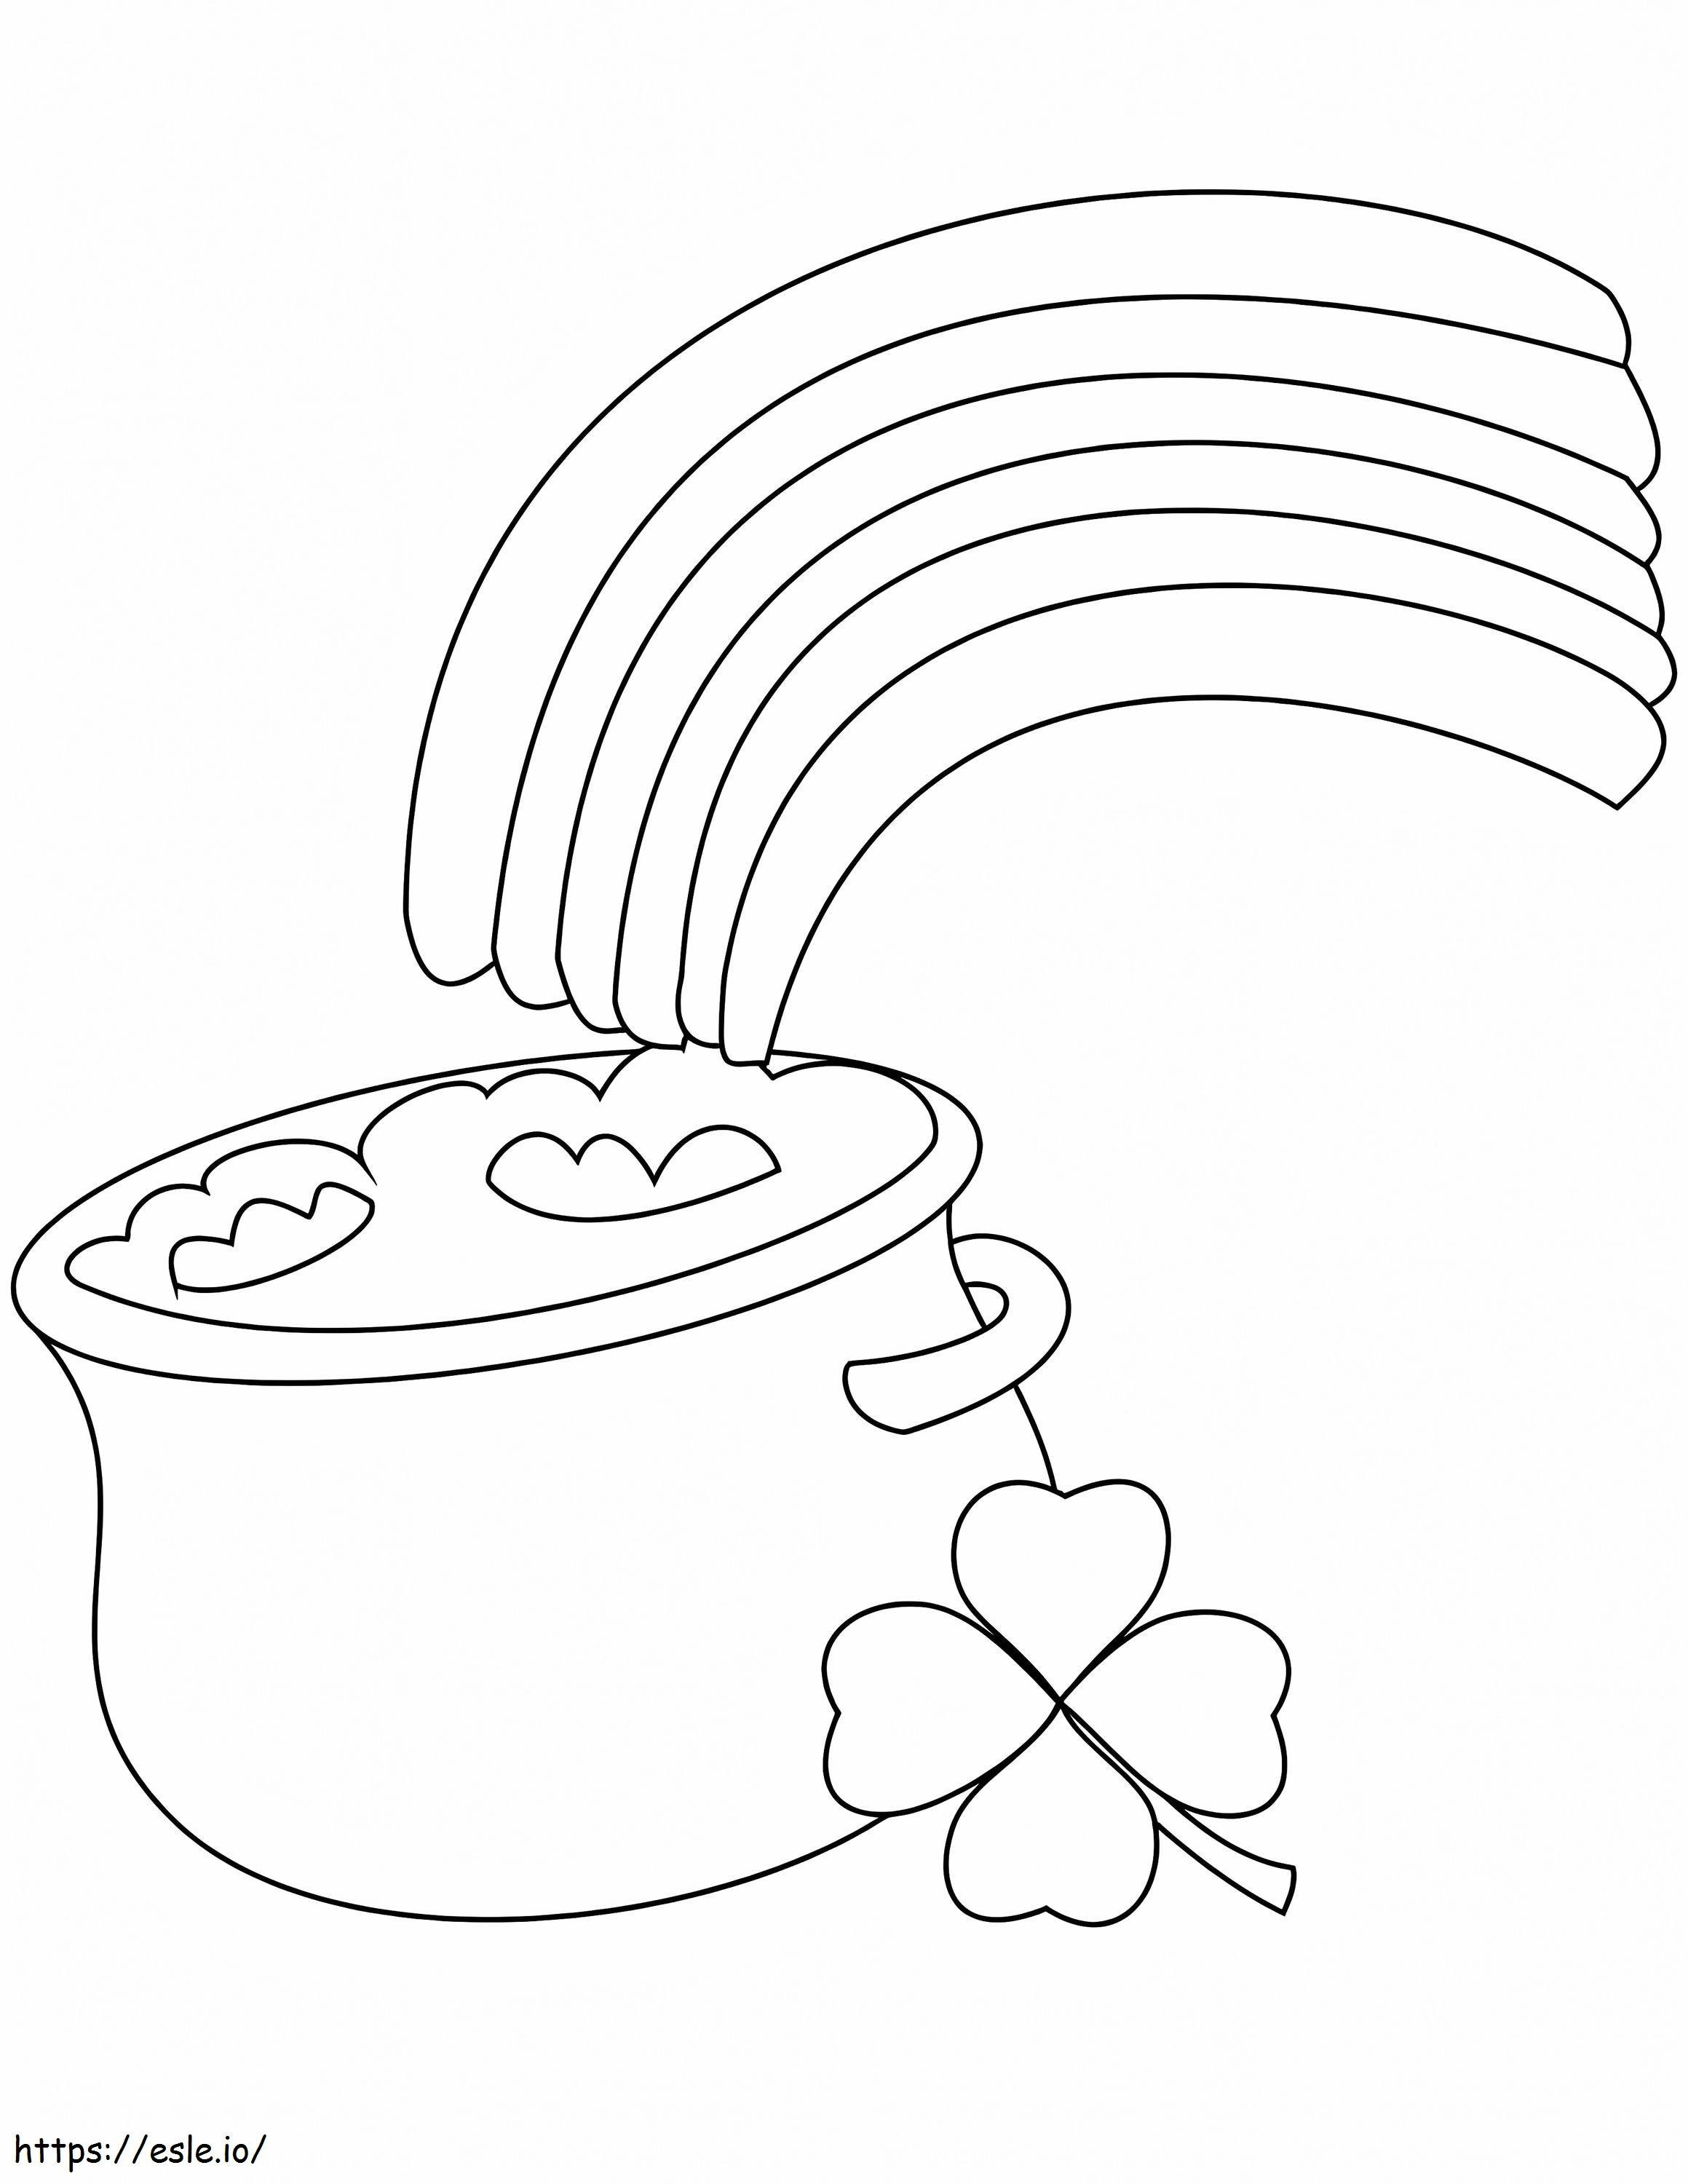 Rainbow And Pot Of Gold coloring page